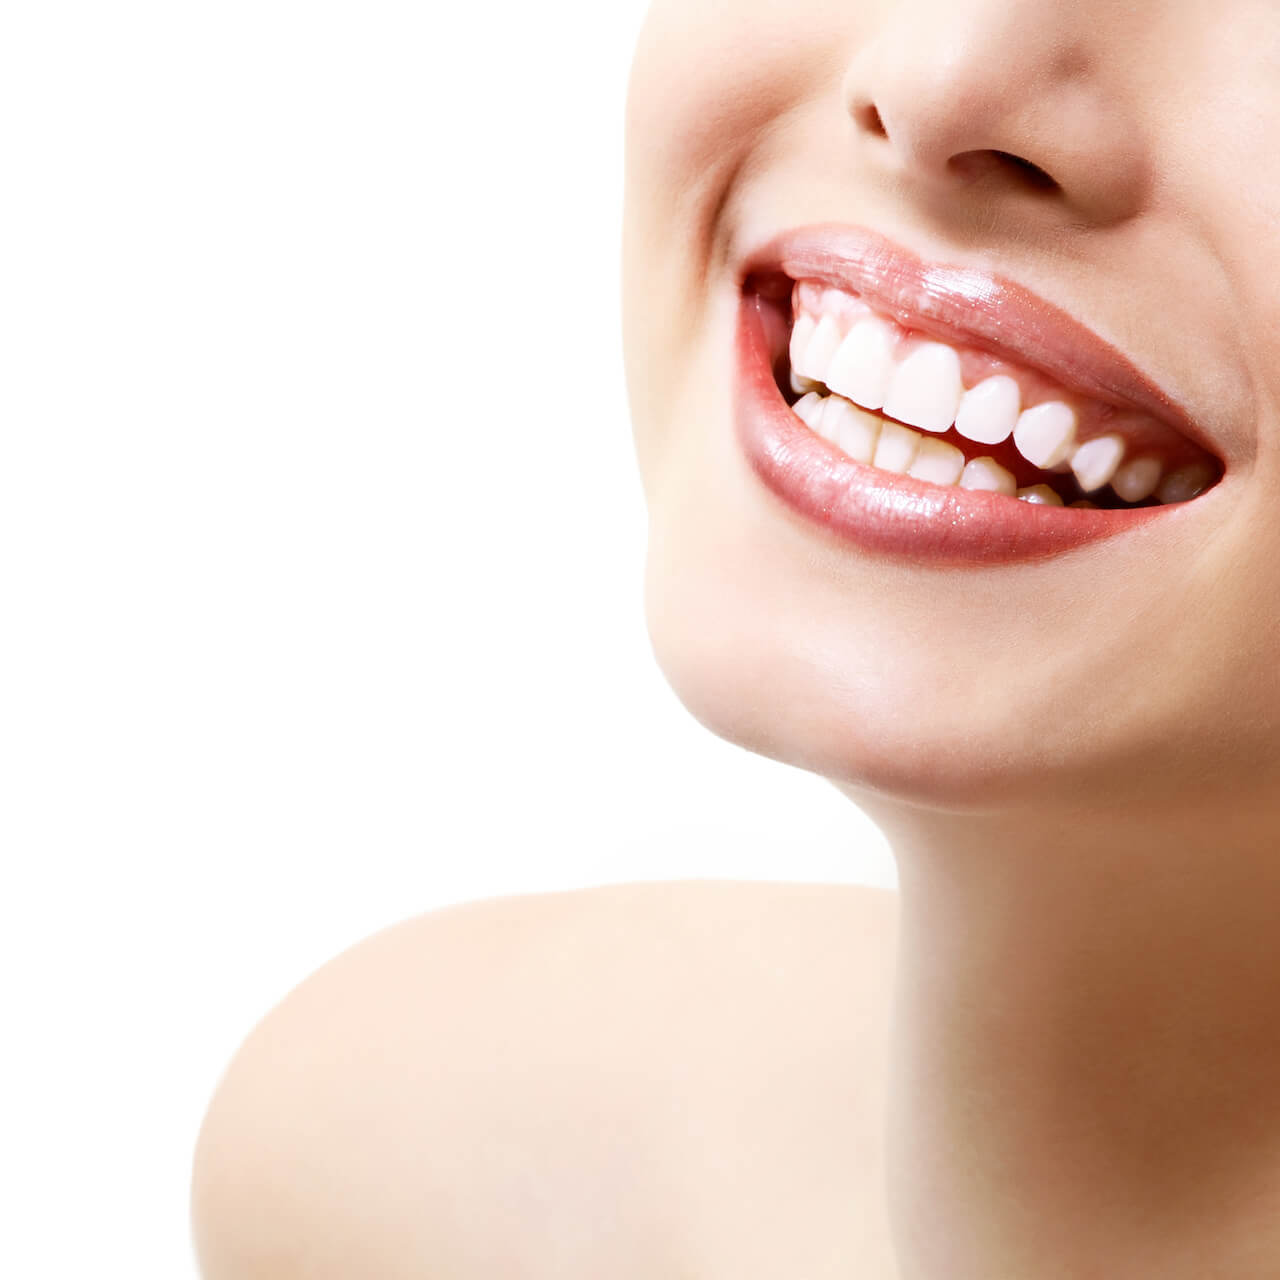 Woman showcasing perfectly aligned and sparkling white teeth.